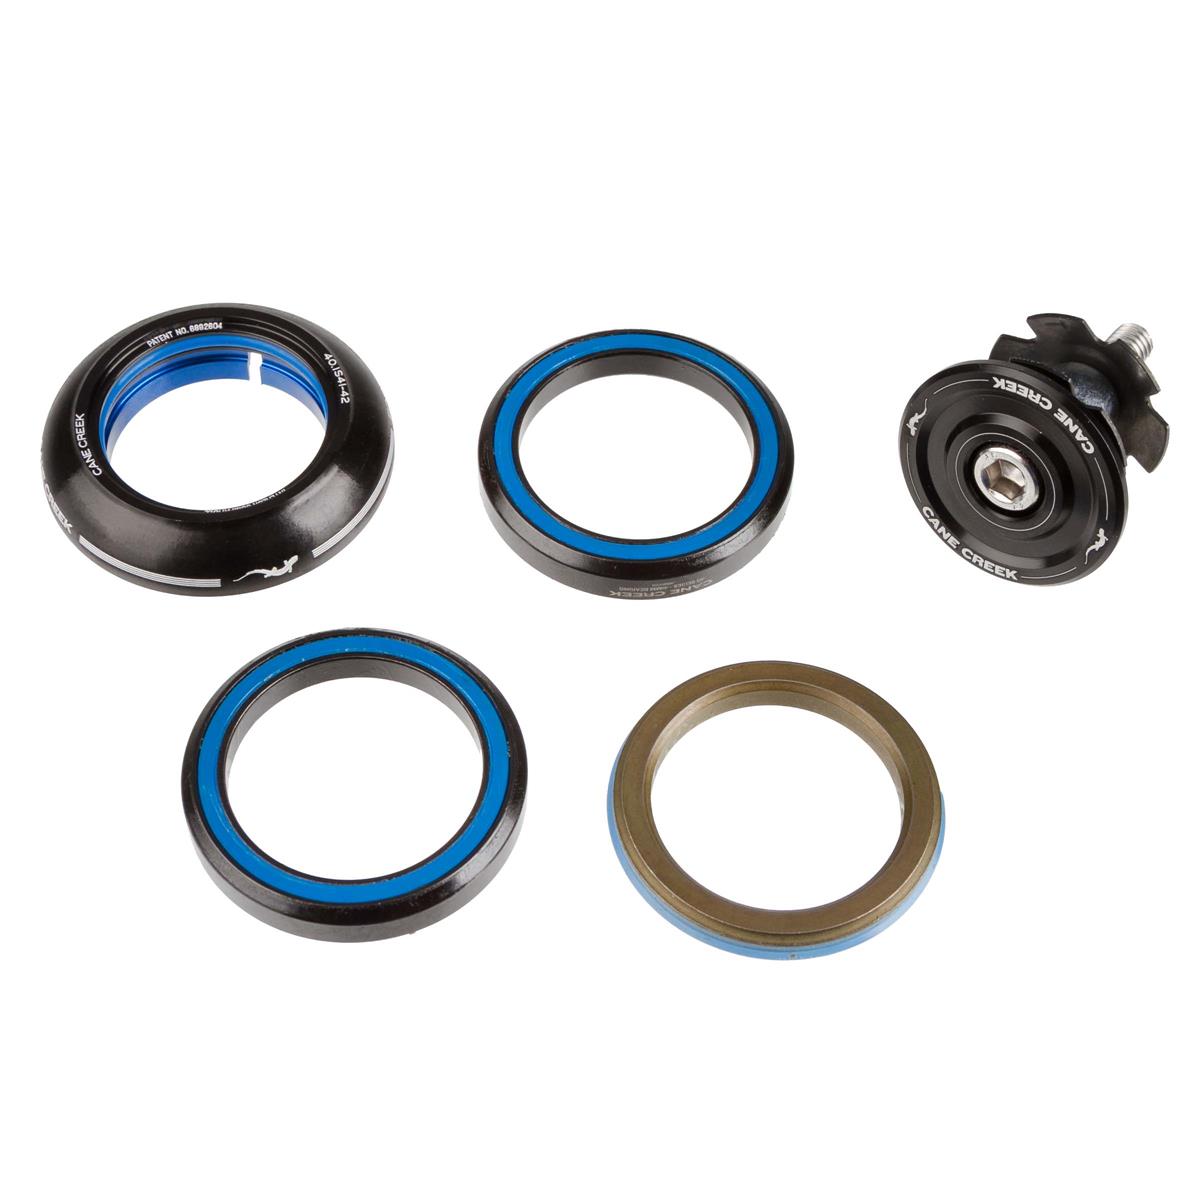 Cane Creek Headset 40 IS41/28.6 | IS41/30, Short, 1 1/8